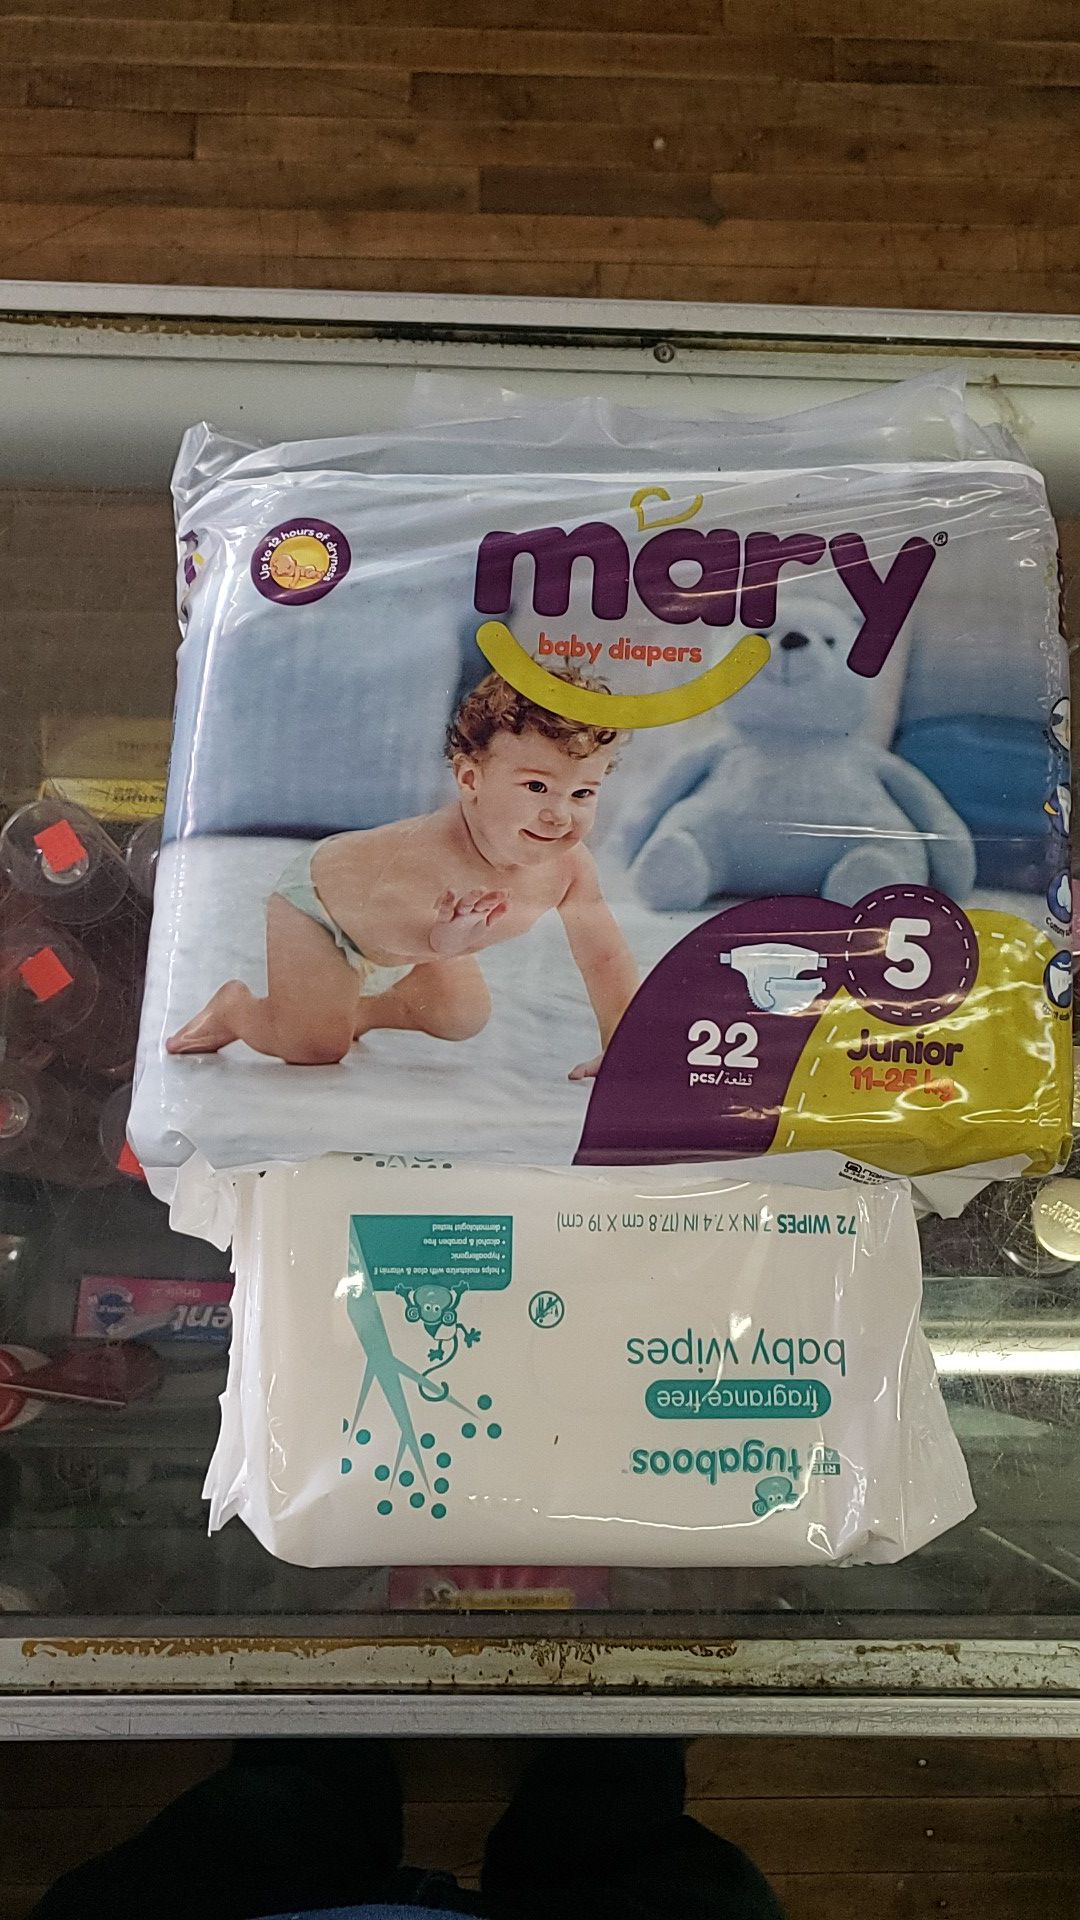 $5 diapers and wipes